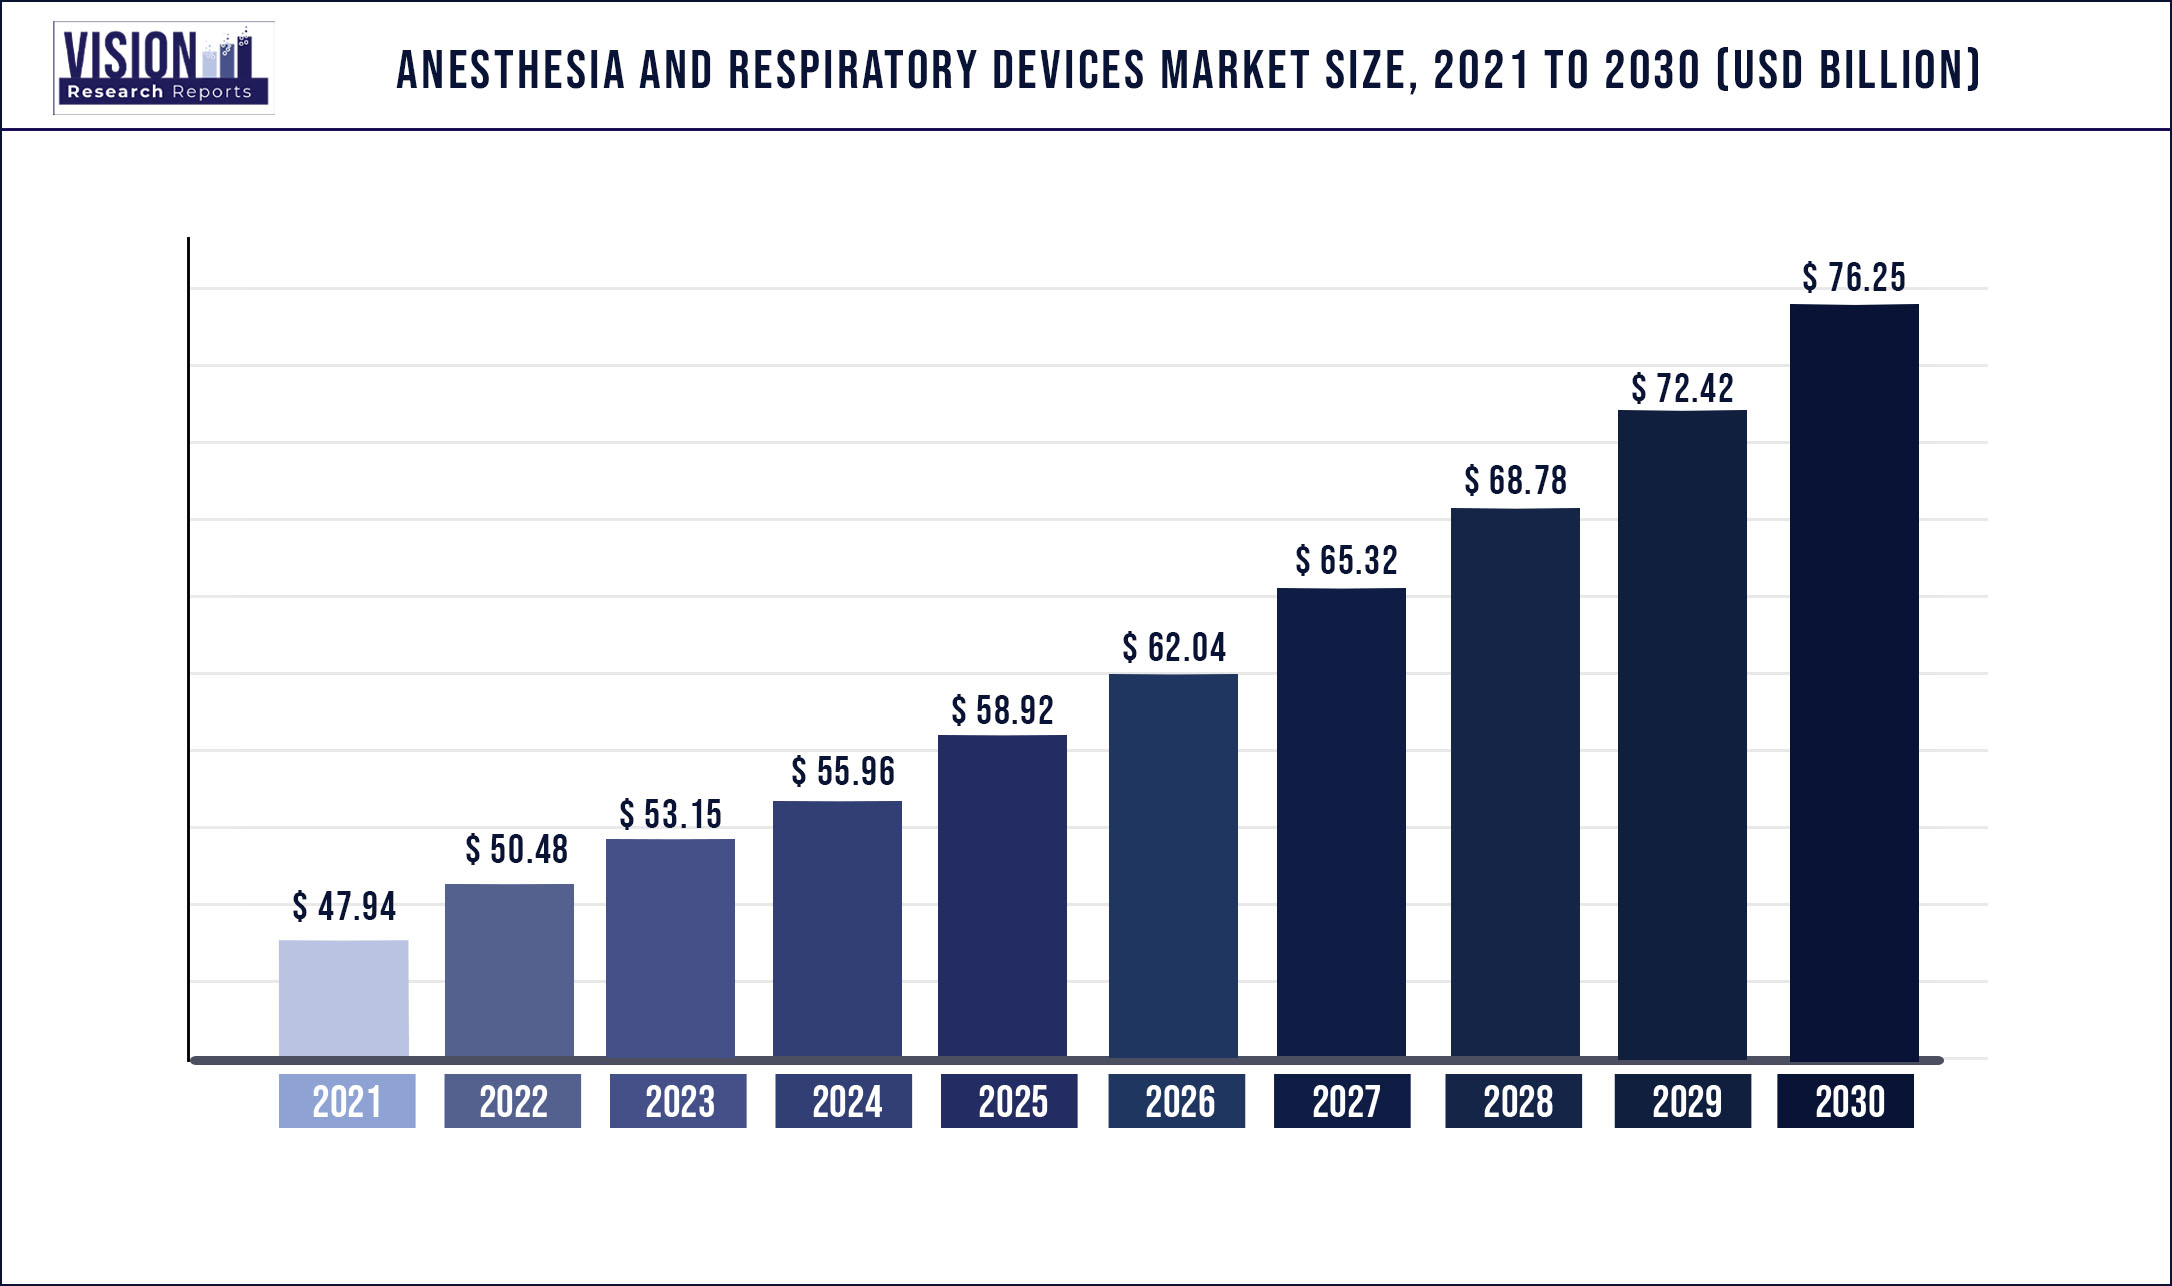 Anesthesia And Respiratory Devices Market Size 2021 to 2030